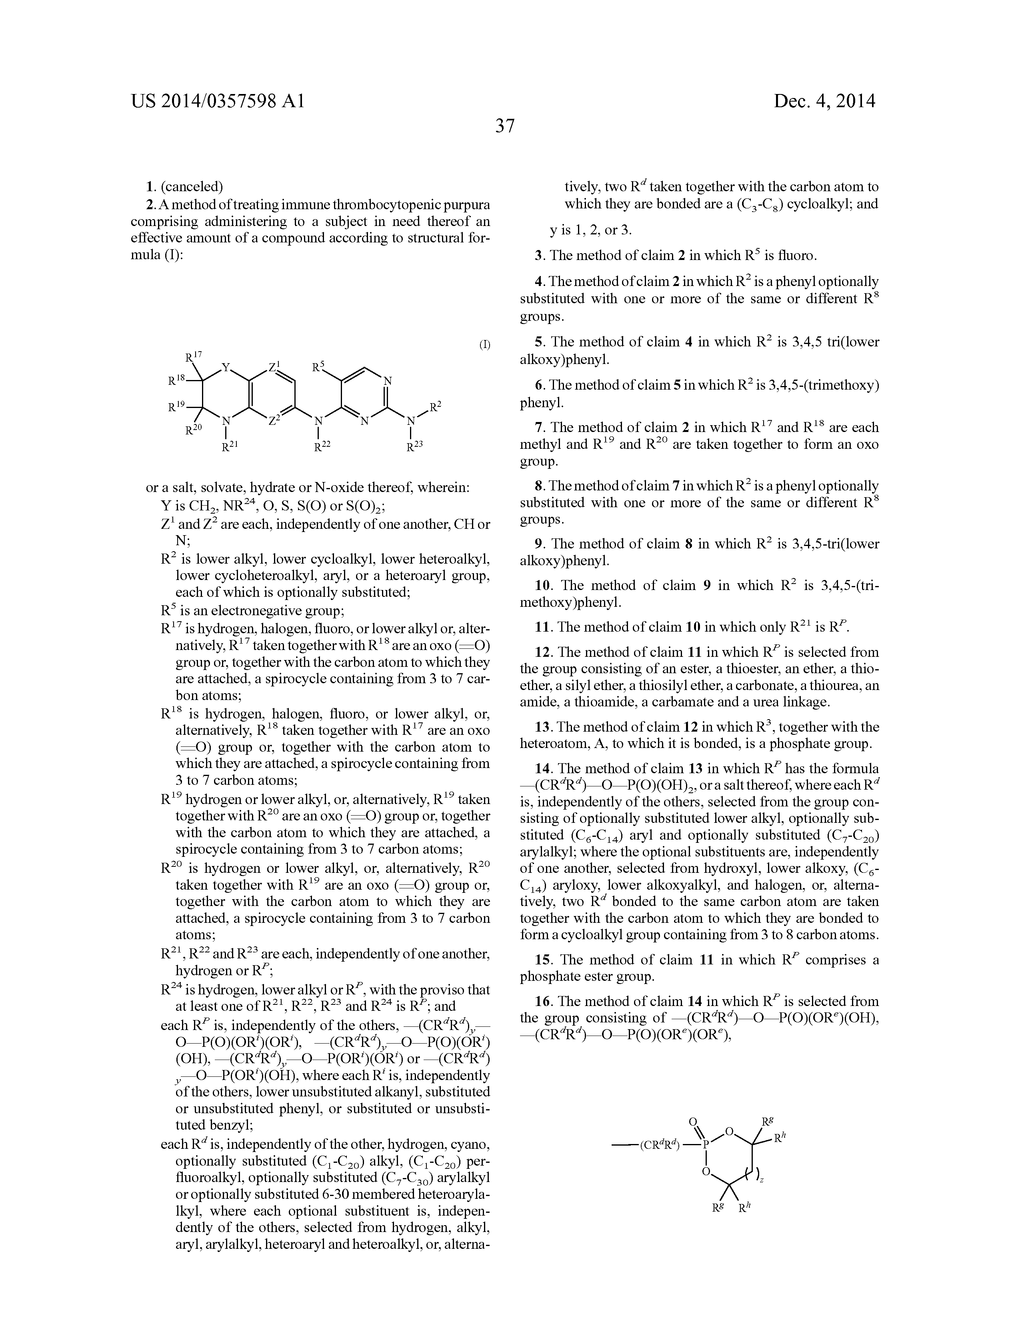 Prodrugs of 2,4-Pyrimidinediamine Compounds and Their Uses - diagram, schematic, and image 50